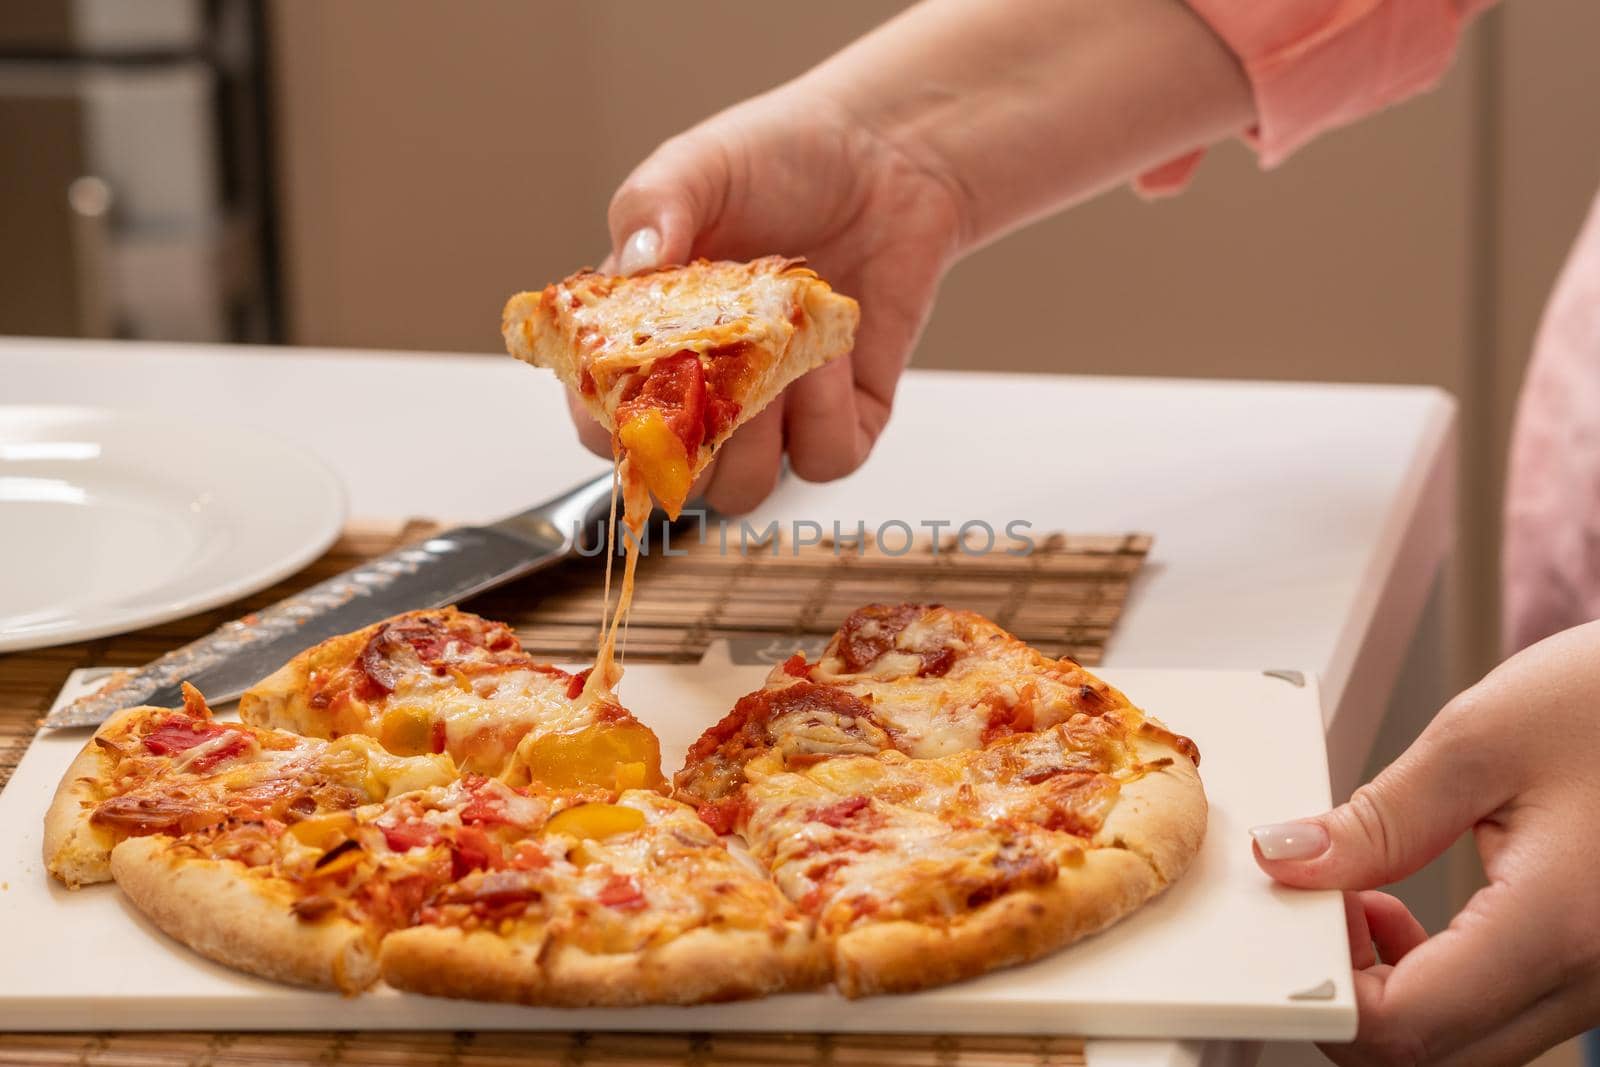 Raised slice of pizza before eating it and stretching strands of cheese.